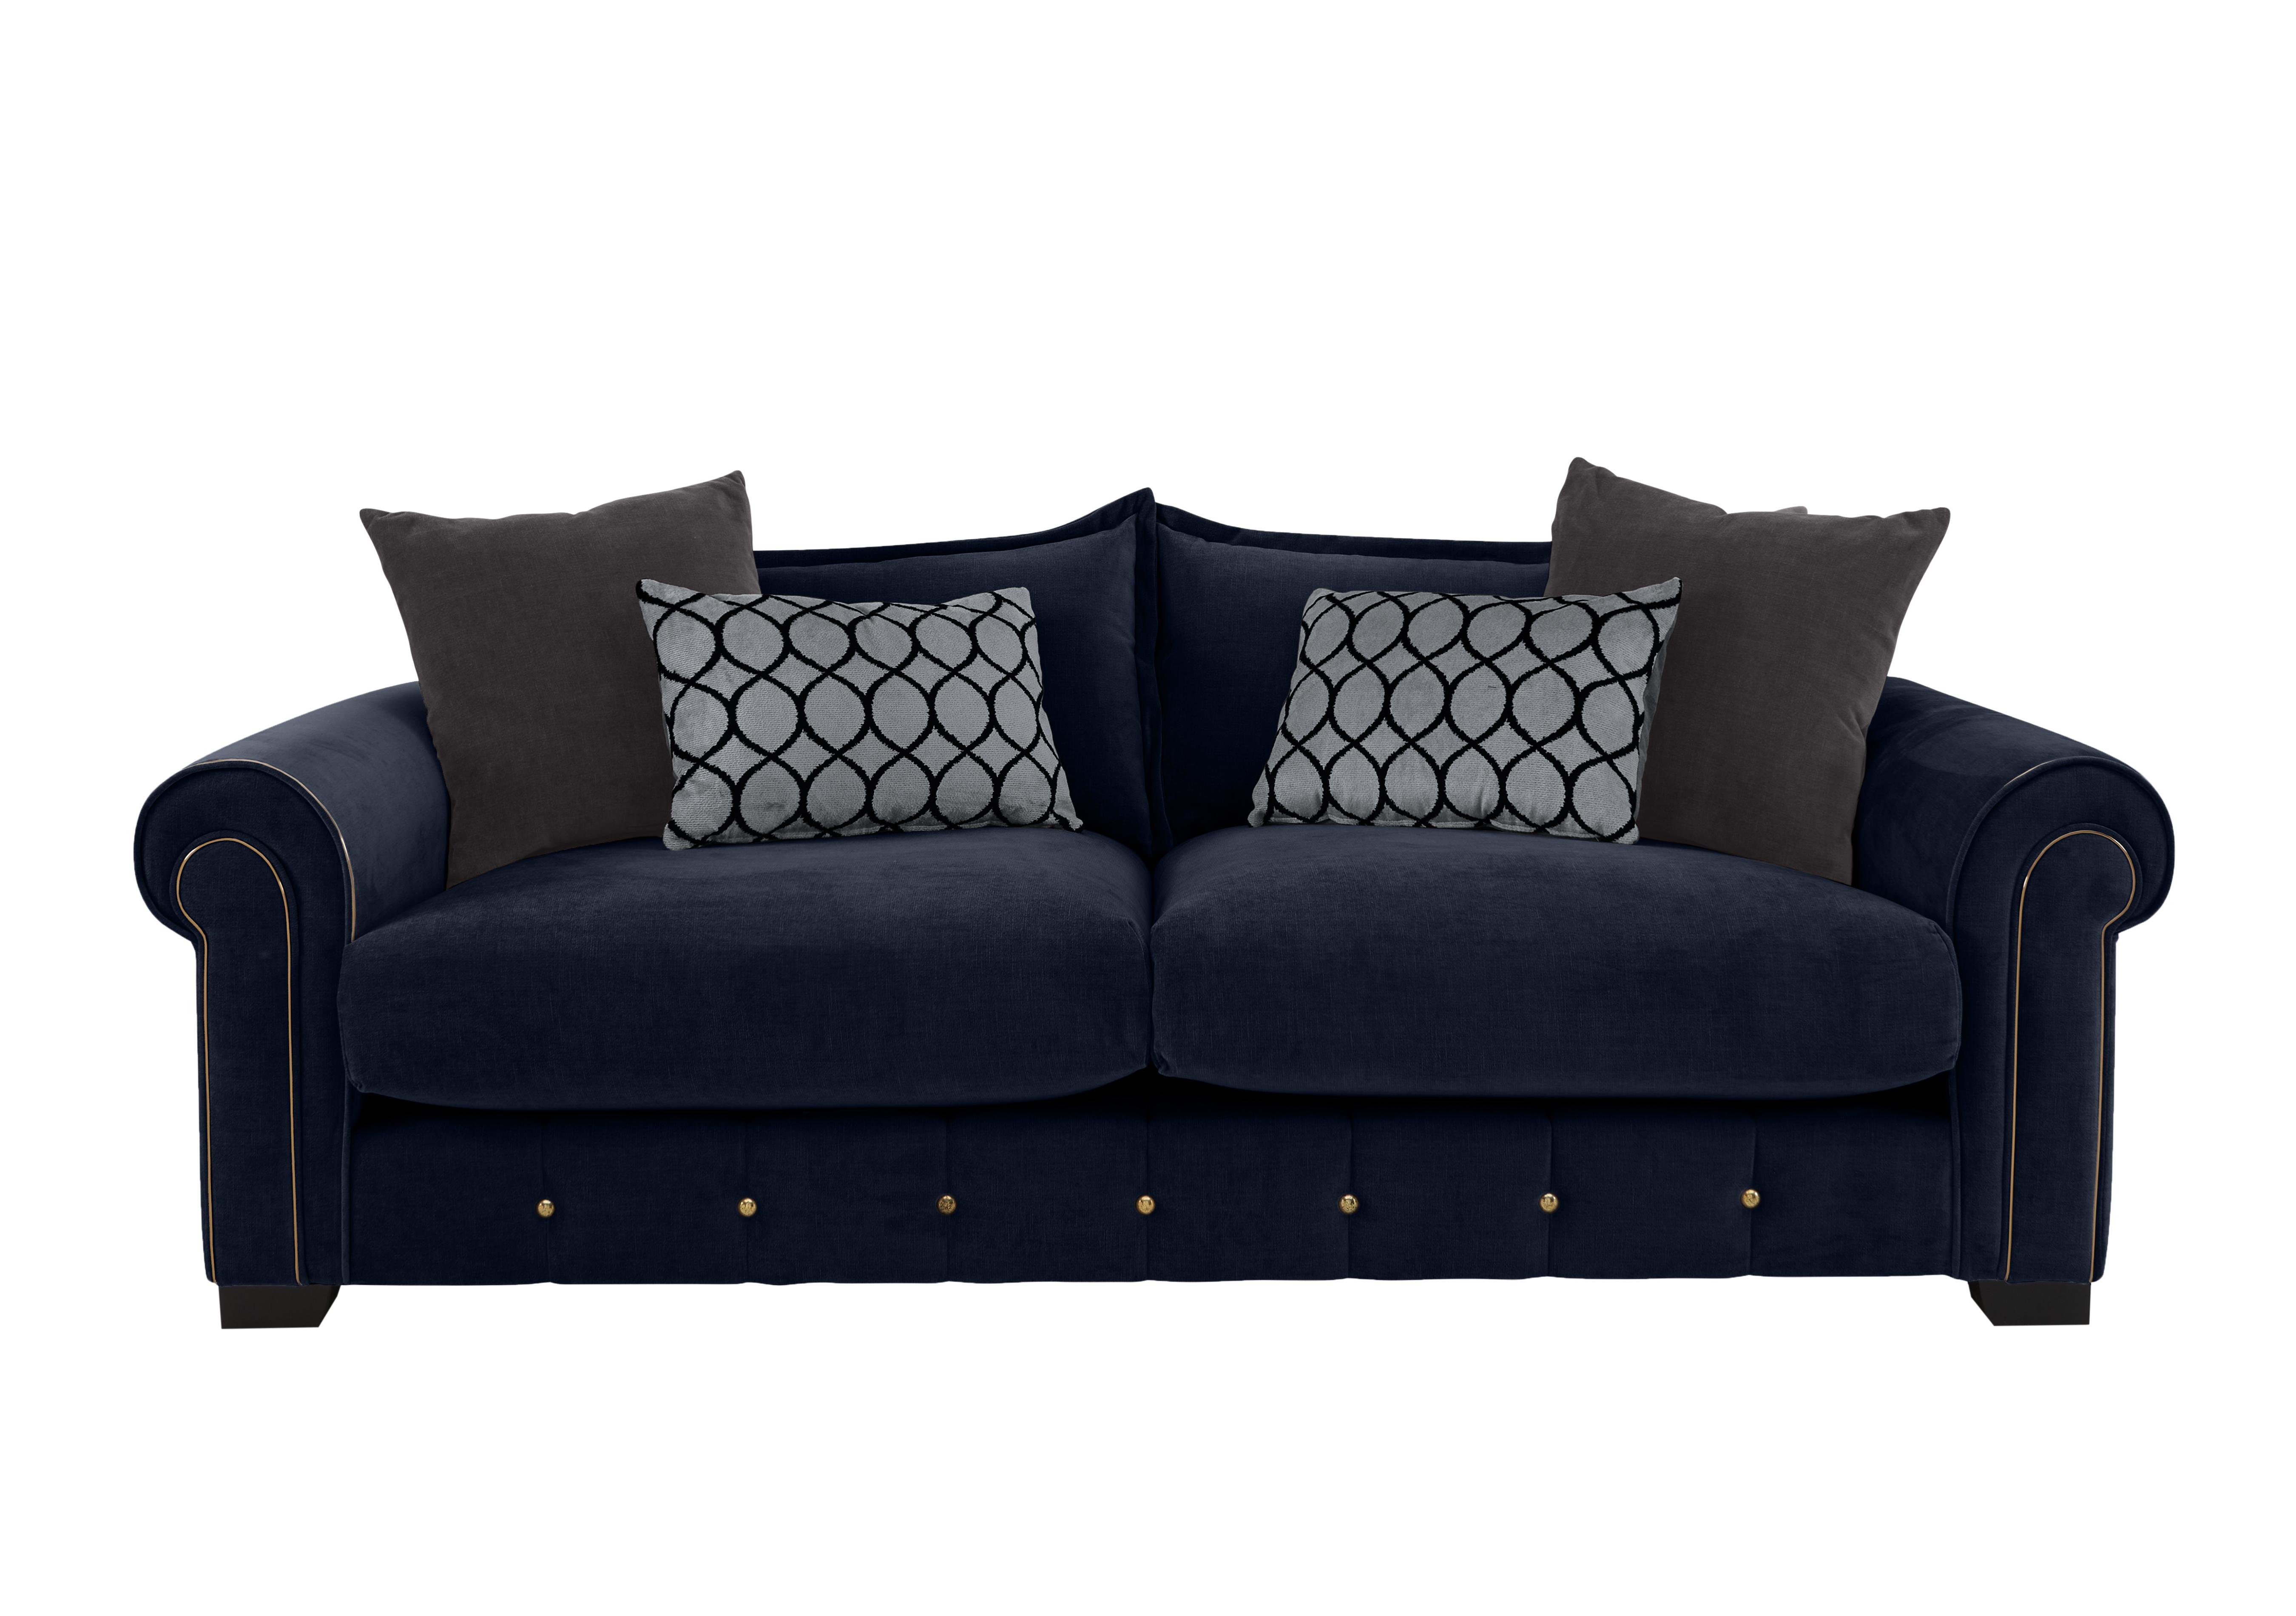 Sumptuous 4 Seater Fabric Sofa in Chamonix Navy Dk/Gold on Furniture Village